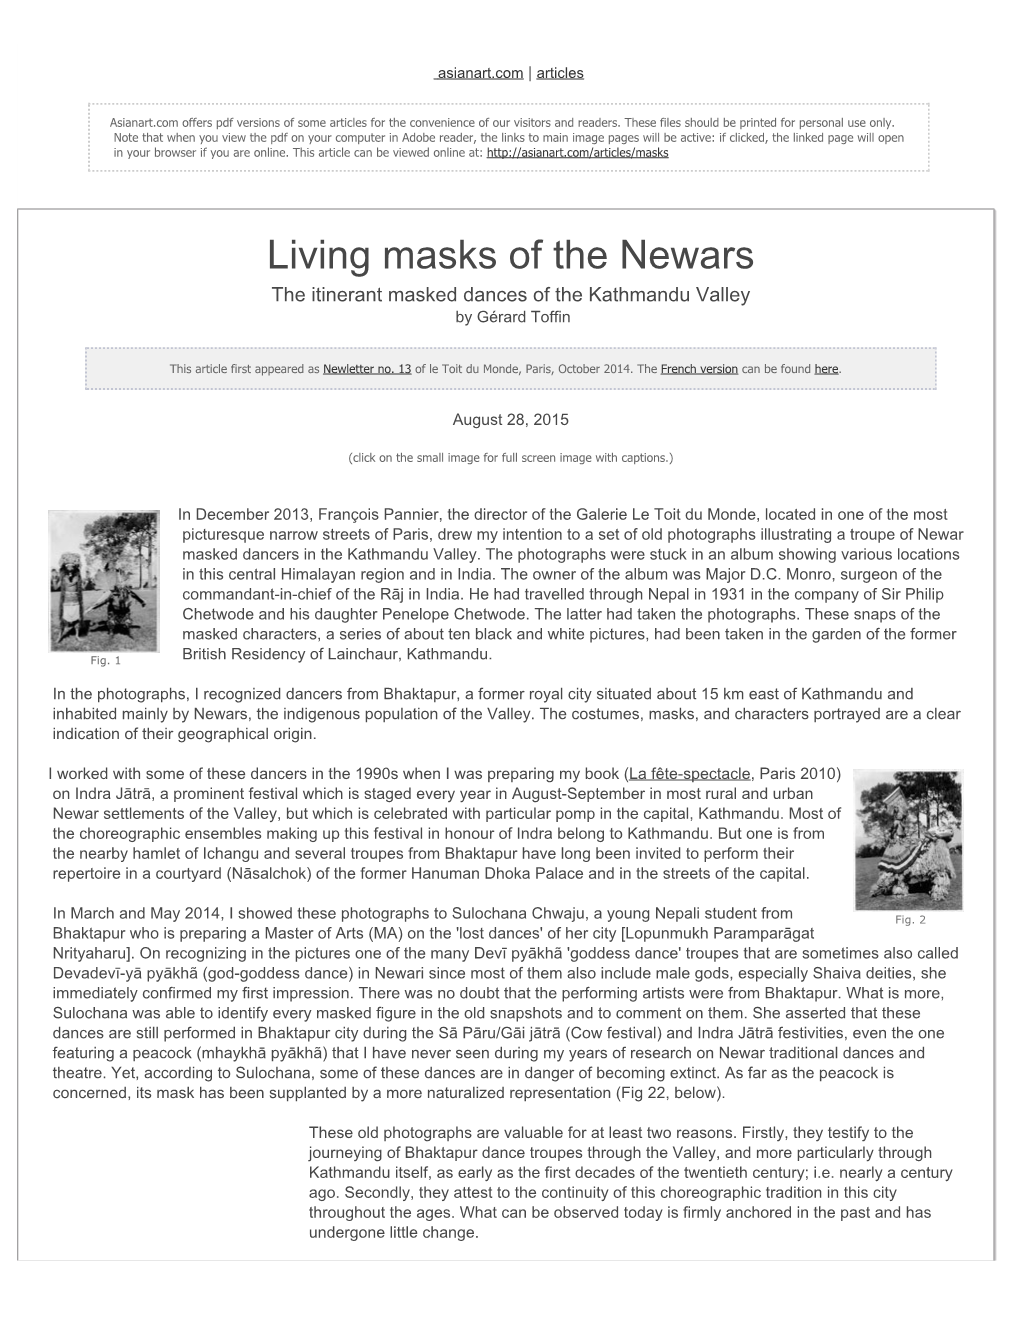 Living Masks of the Newars the Itinerant Masked Dances of the Kathmandu Valley by Gérard Toffin